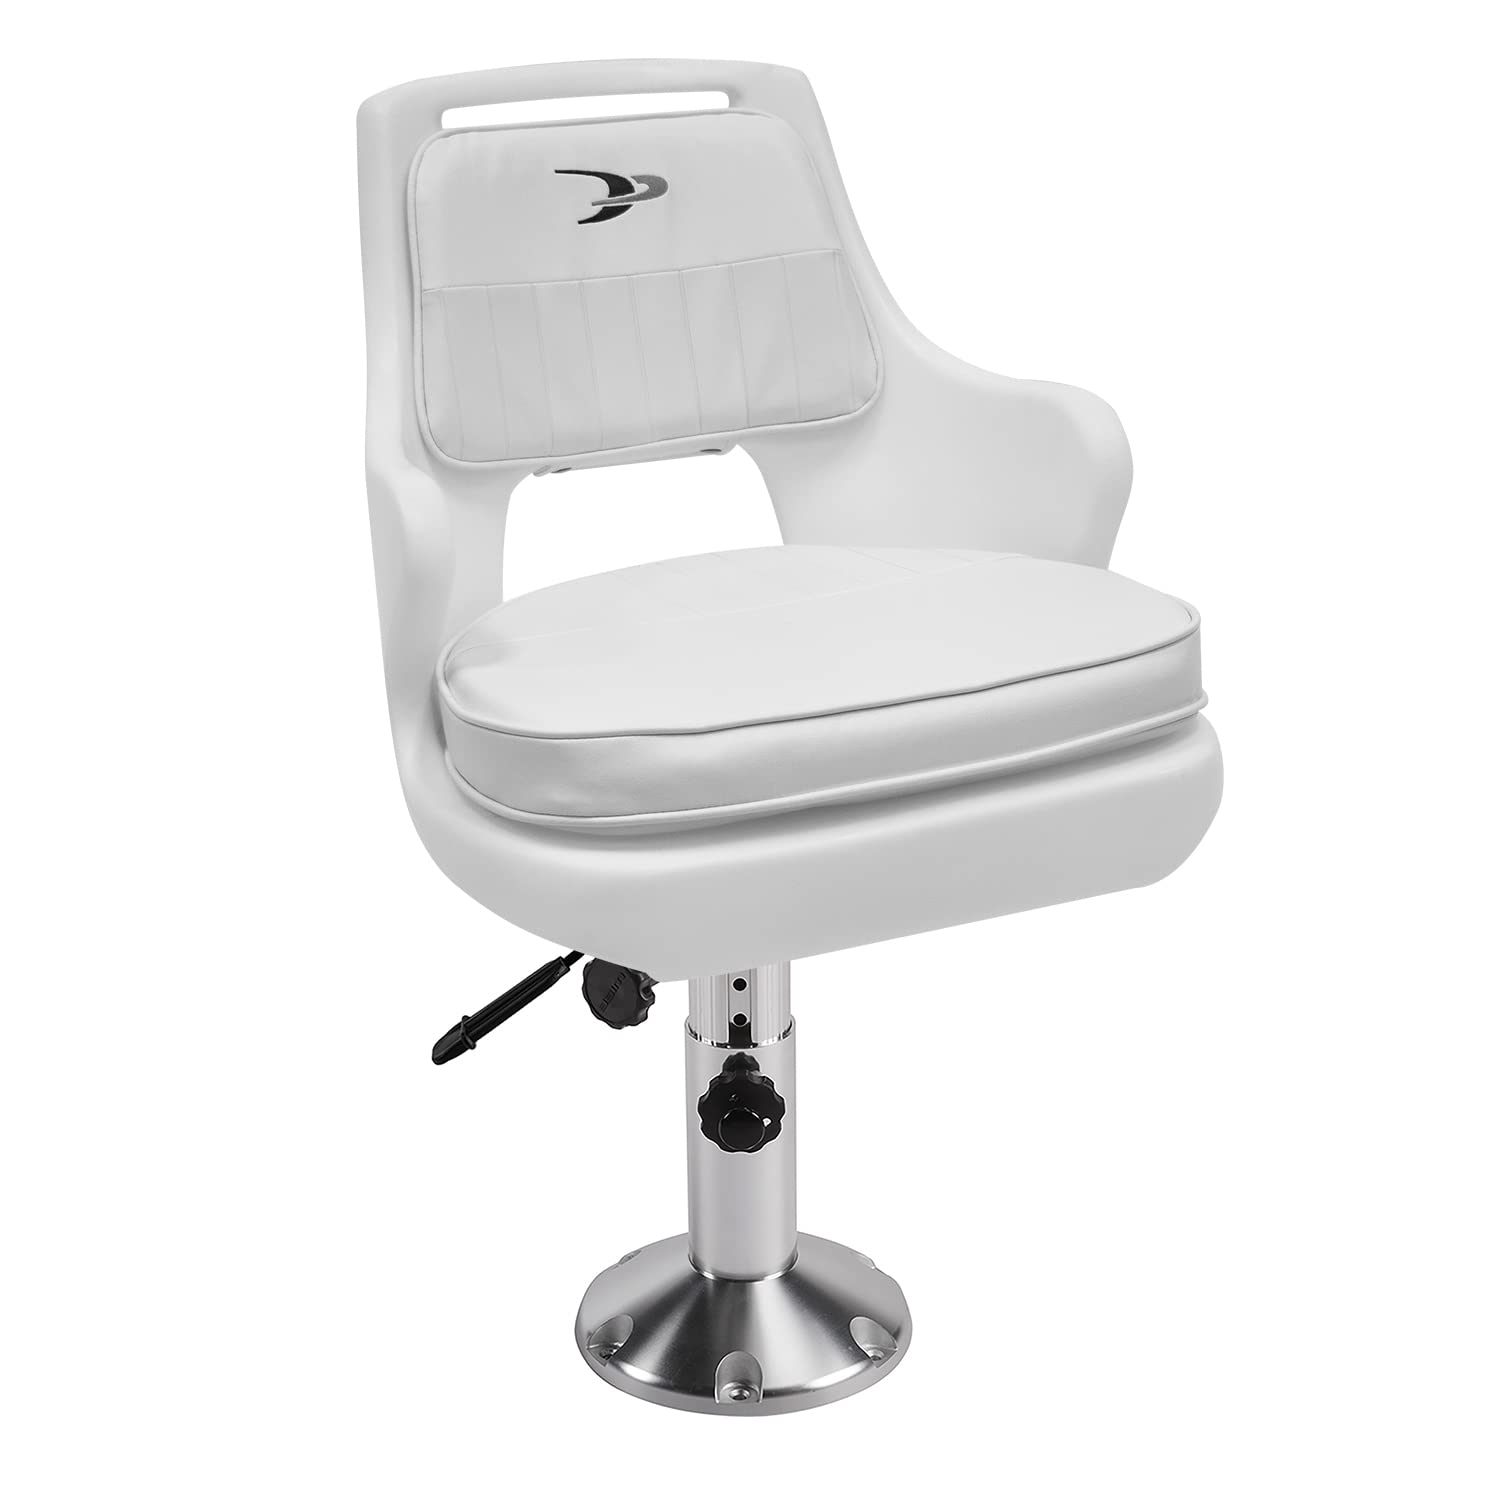 Wise 8WD015-6-710 Standard Pilot Chair with Adjustable Height Pedestal and Seat Slide,White